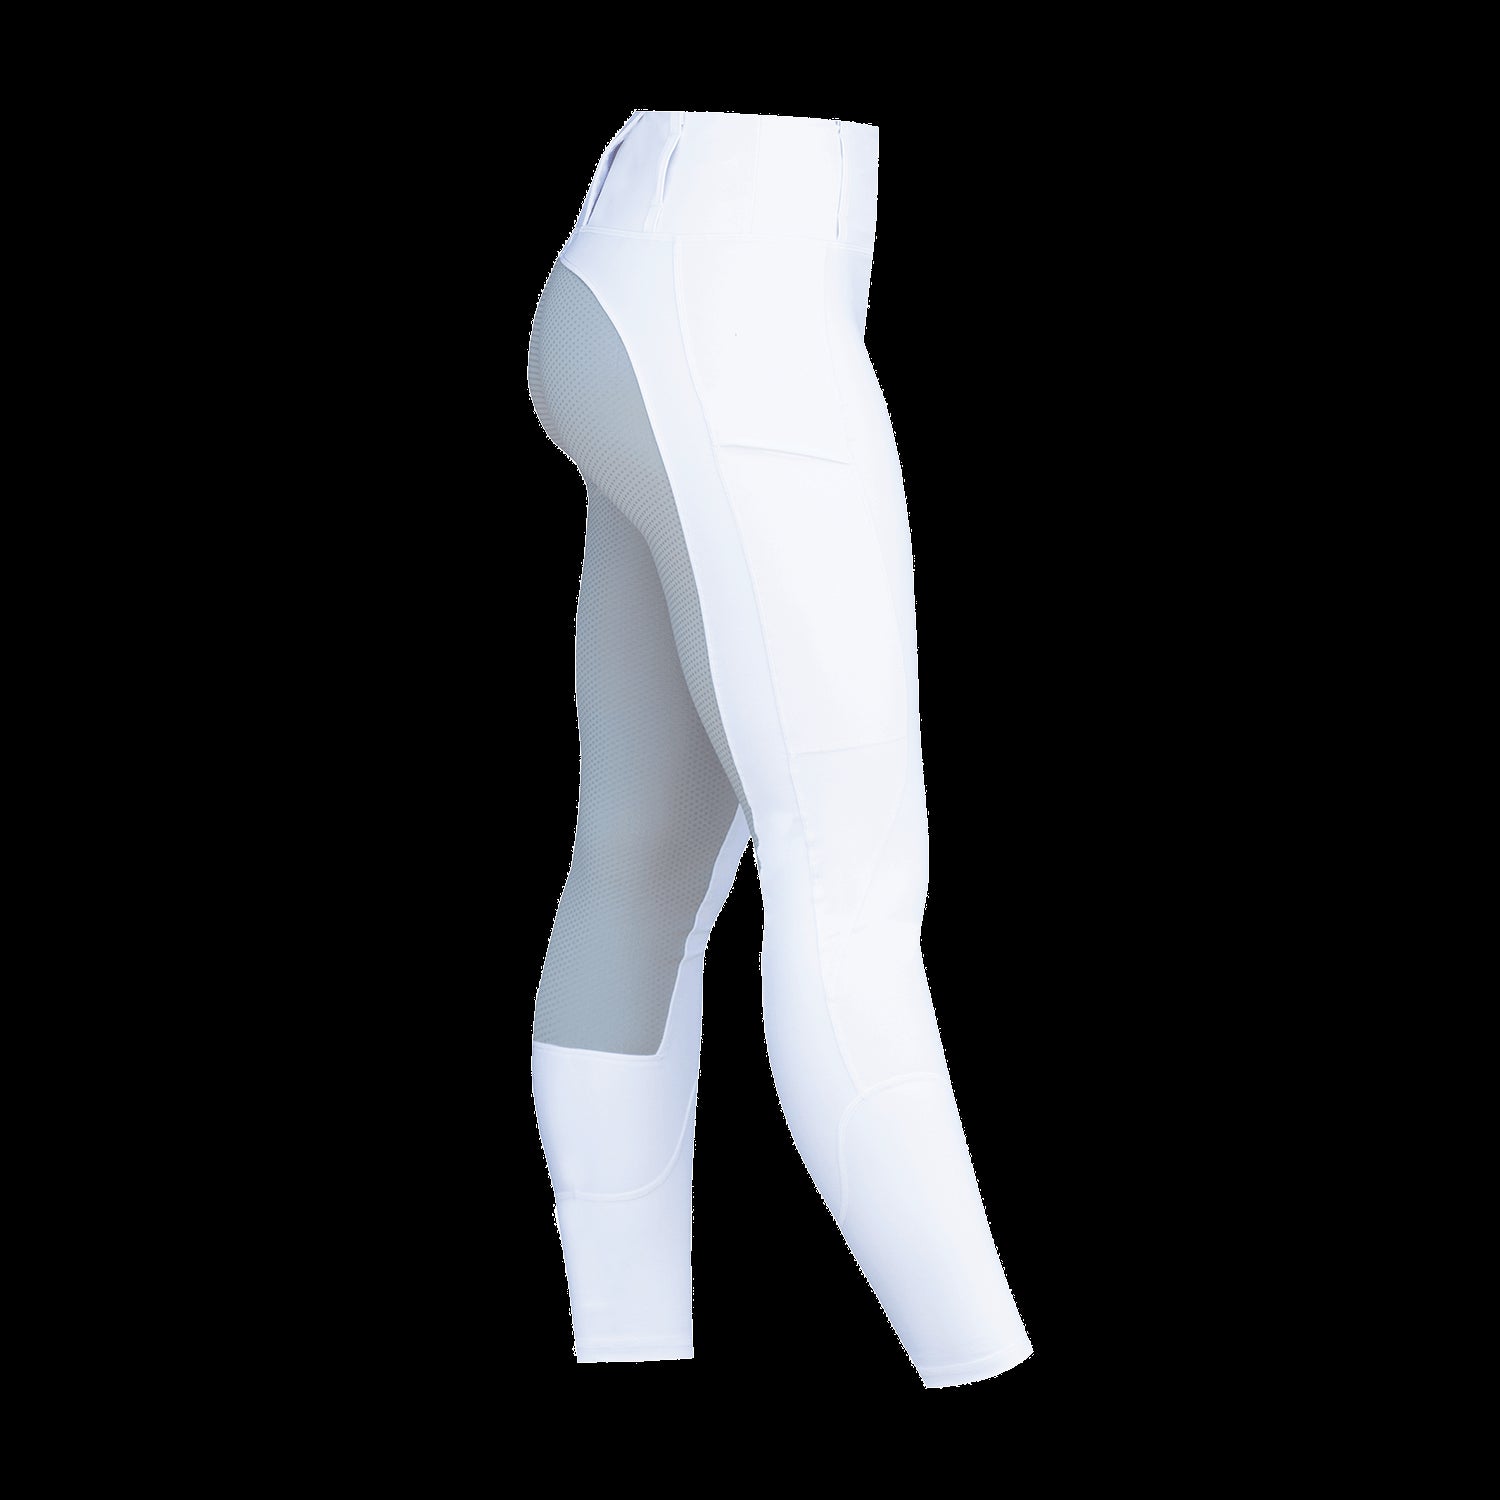 Equetech Performance High Waist Riding Tights - Just Horse Riders